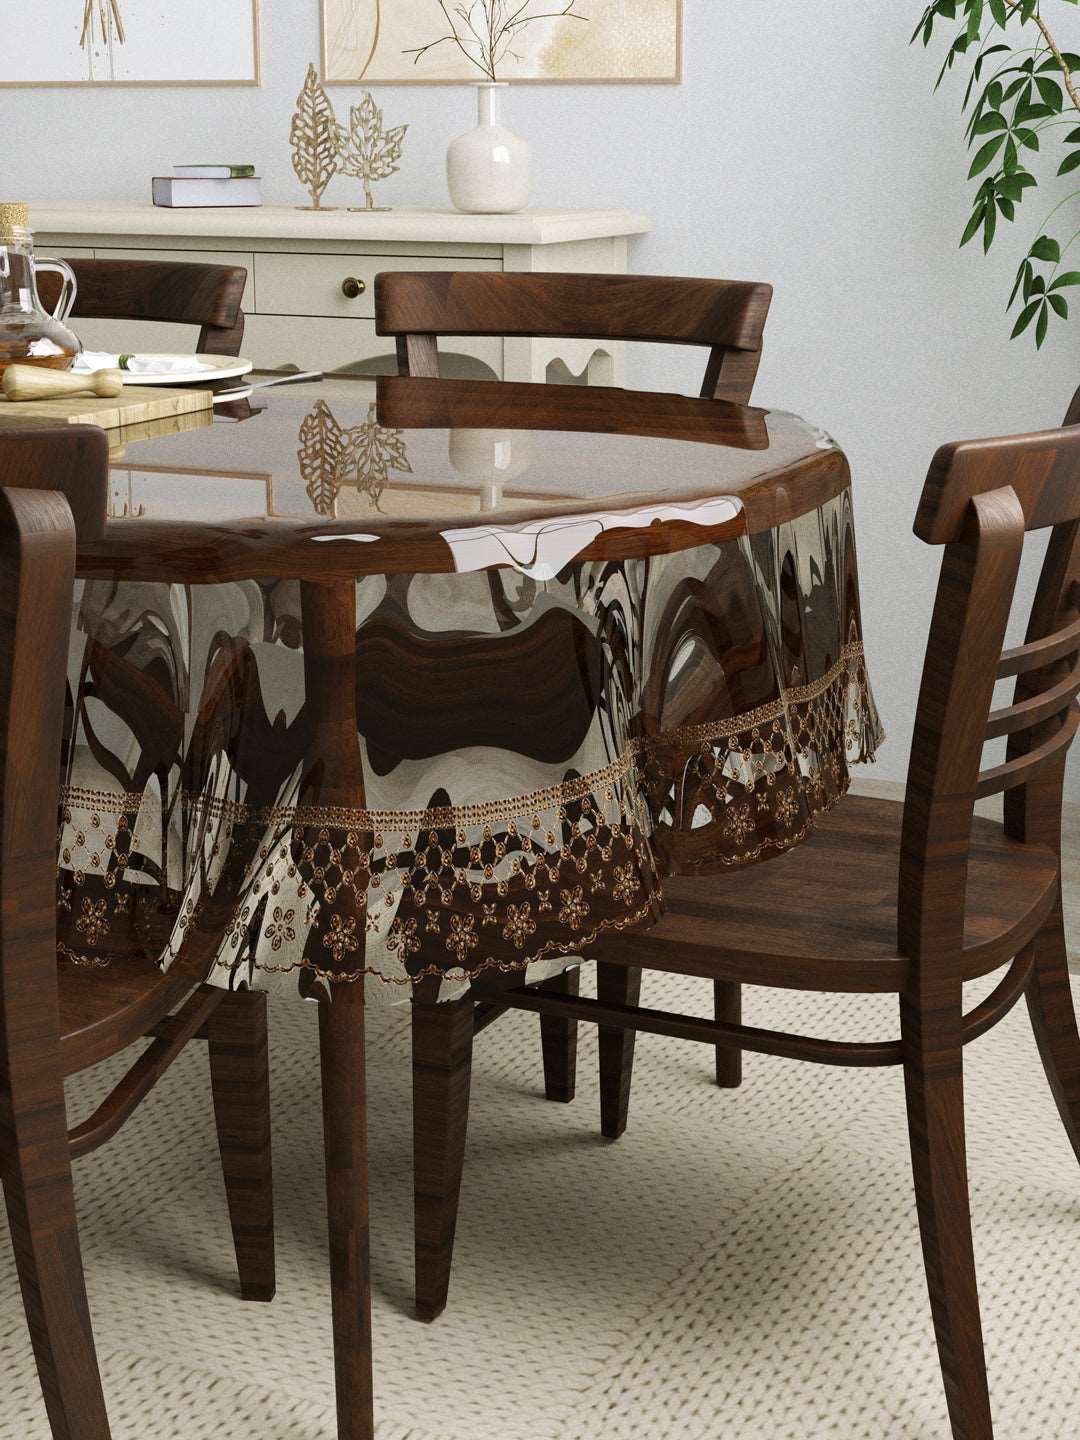 6 Seater Oval Anti Slip Transparent Dining Table Cover; 60x90 Inches; Material - PVC; Brown Tipping Lace